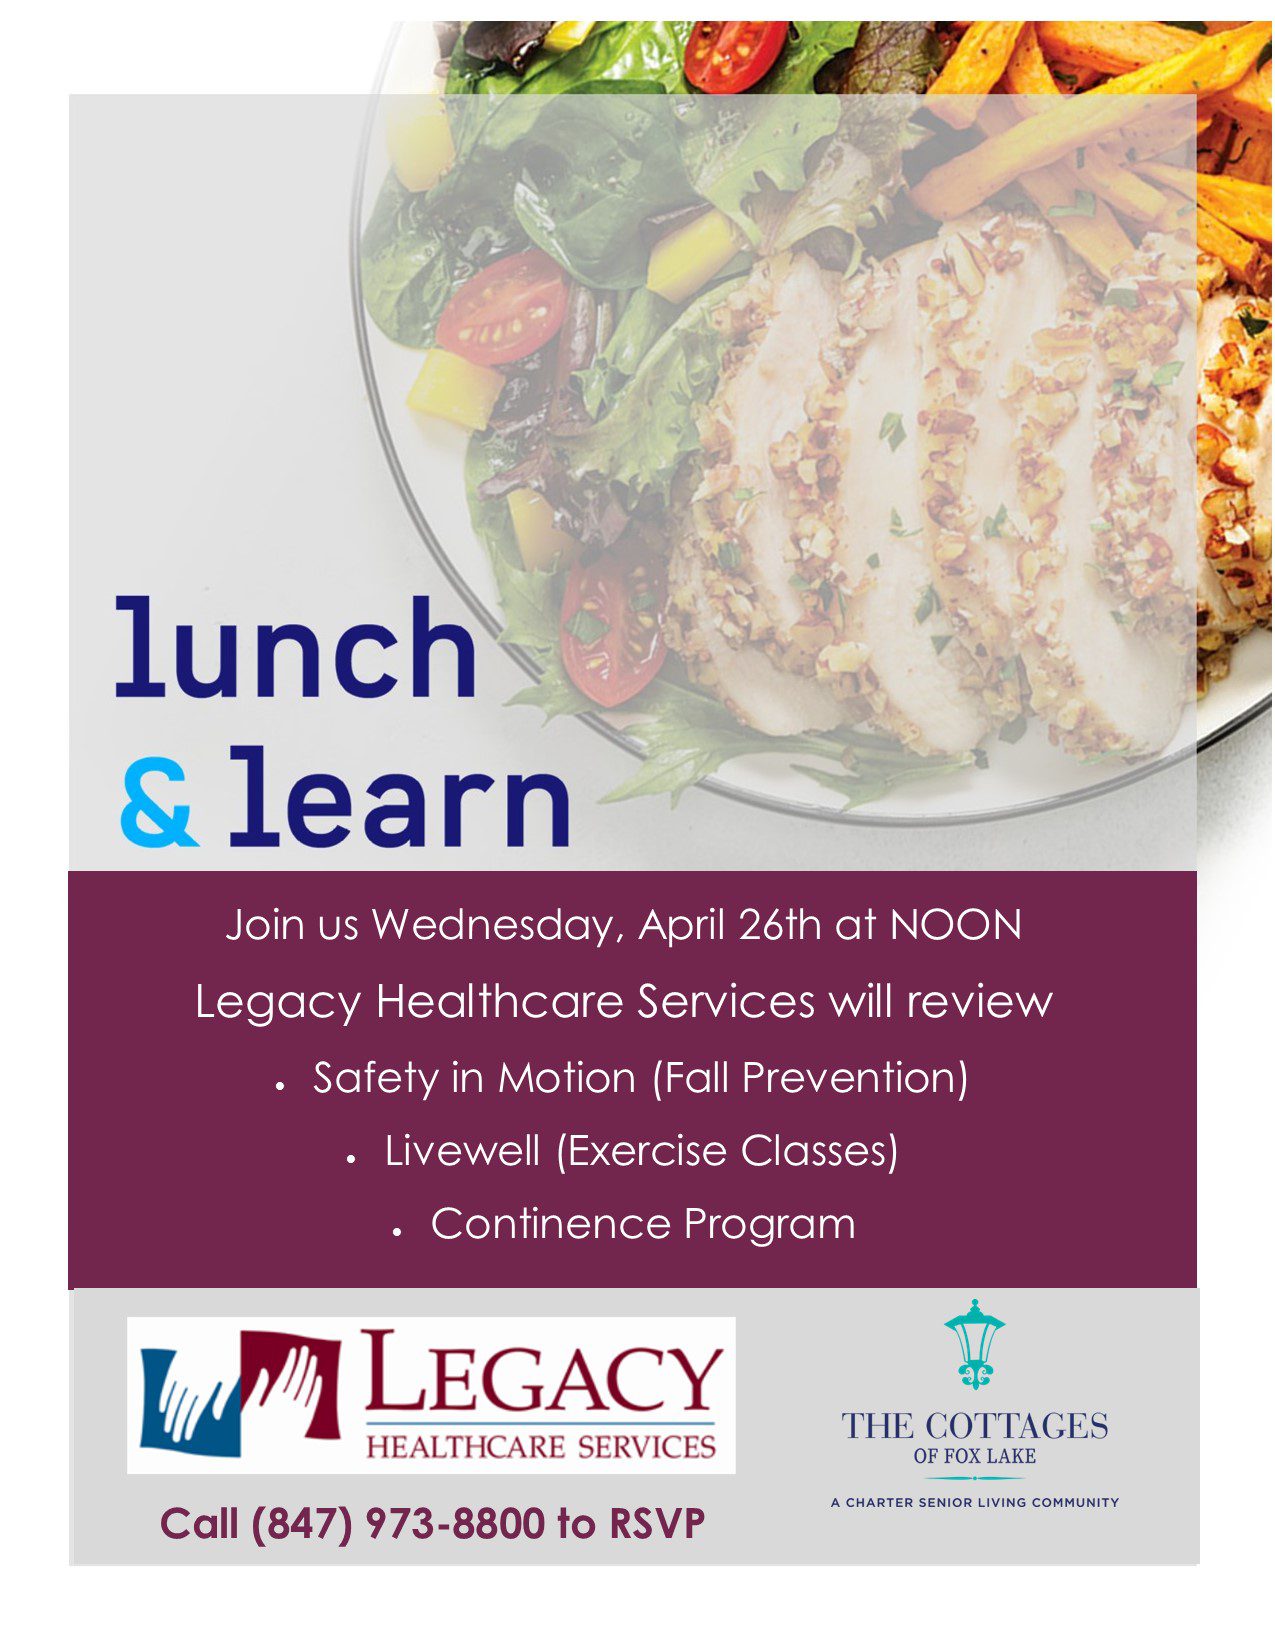 Cottages of Fox Lake - Assisted Living and Memory Care - Family - Lunch and Learn April 2023